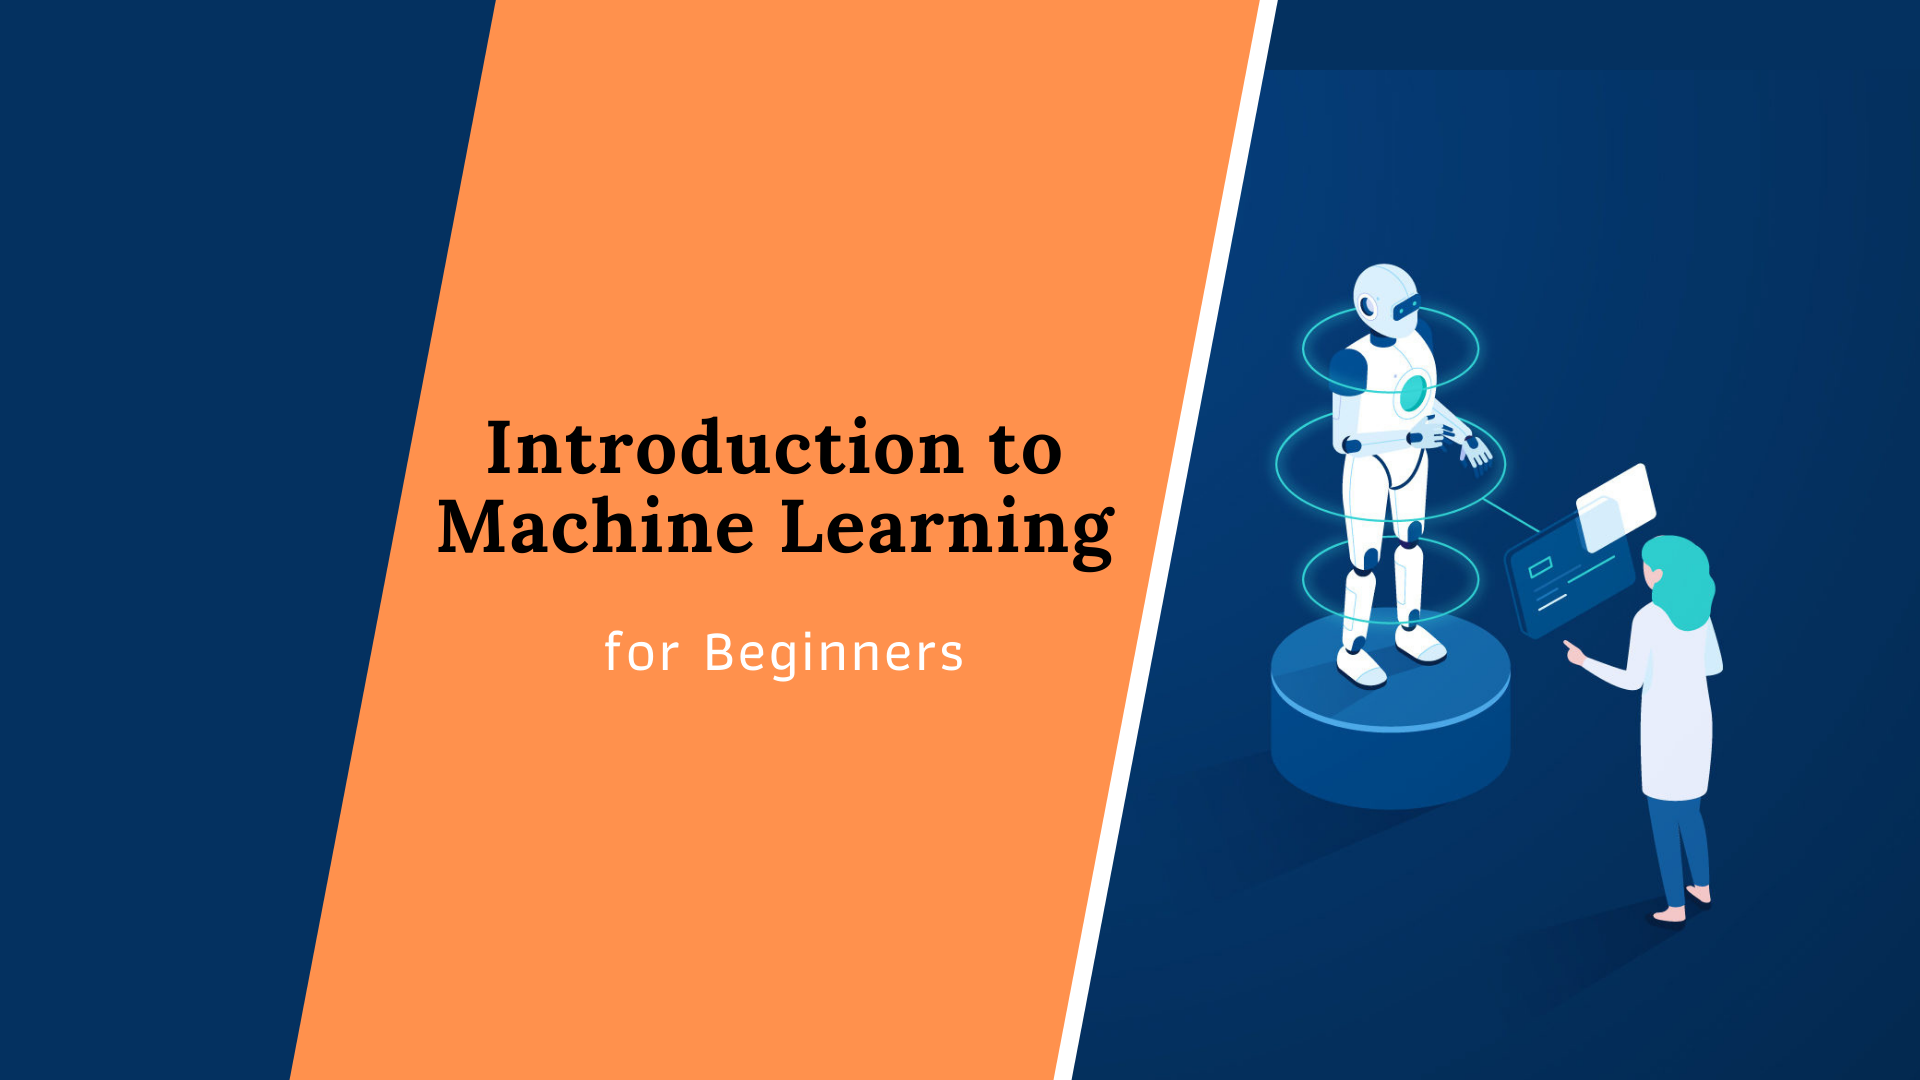 Introduction to Machine Learning for Beginners course image